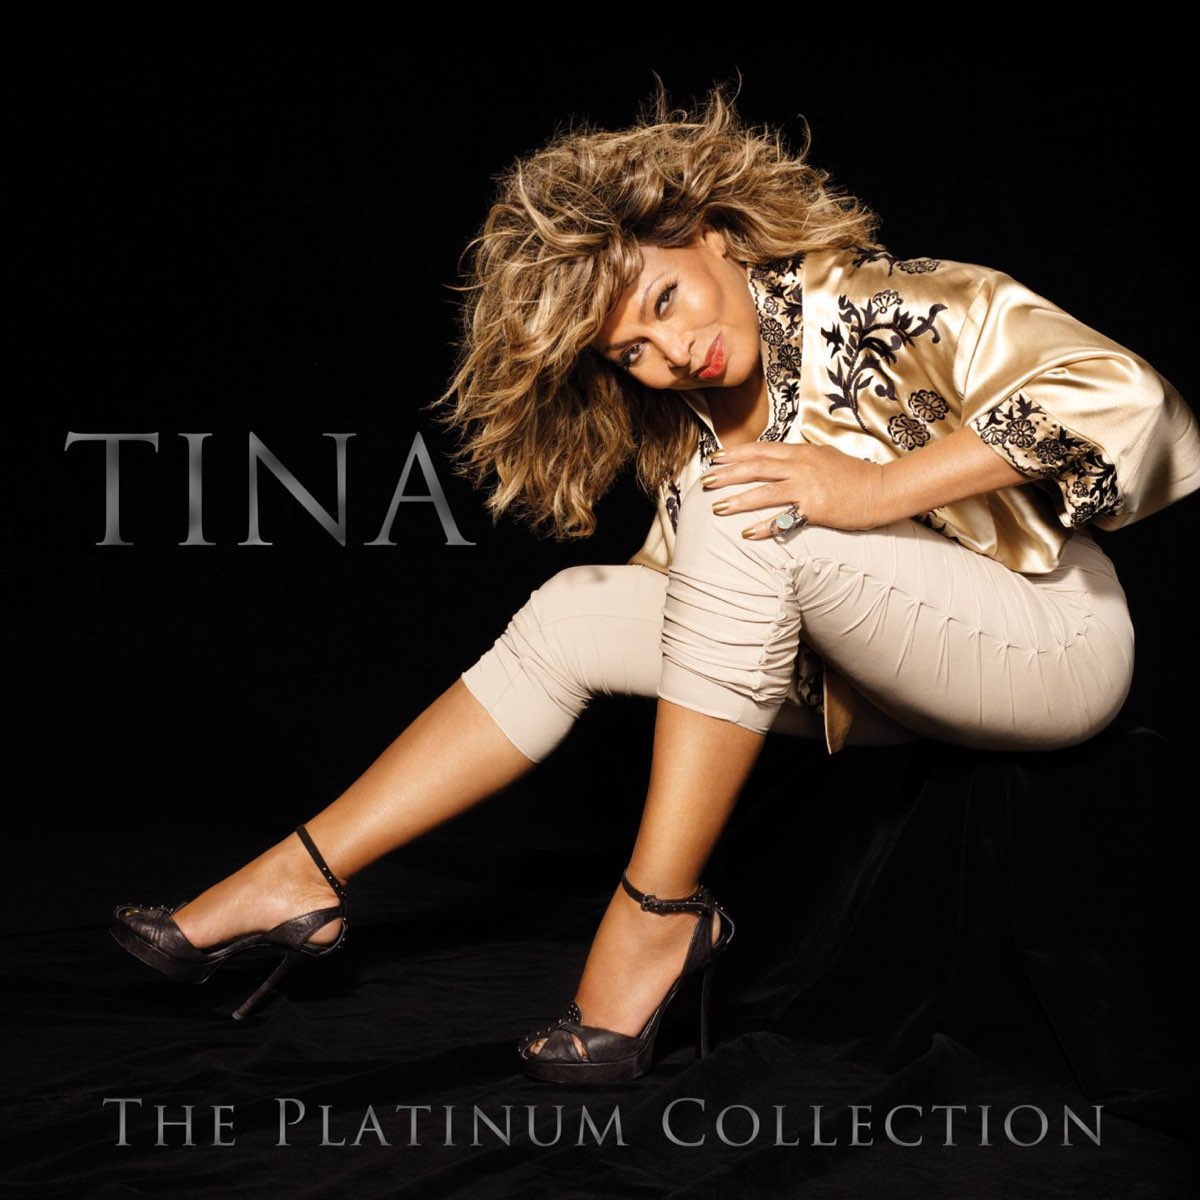 ‎tina Turner The Platinum Collection By Tina Turner On Apple Music